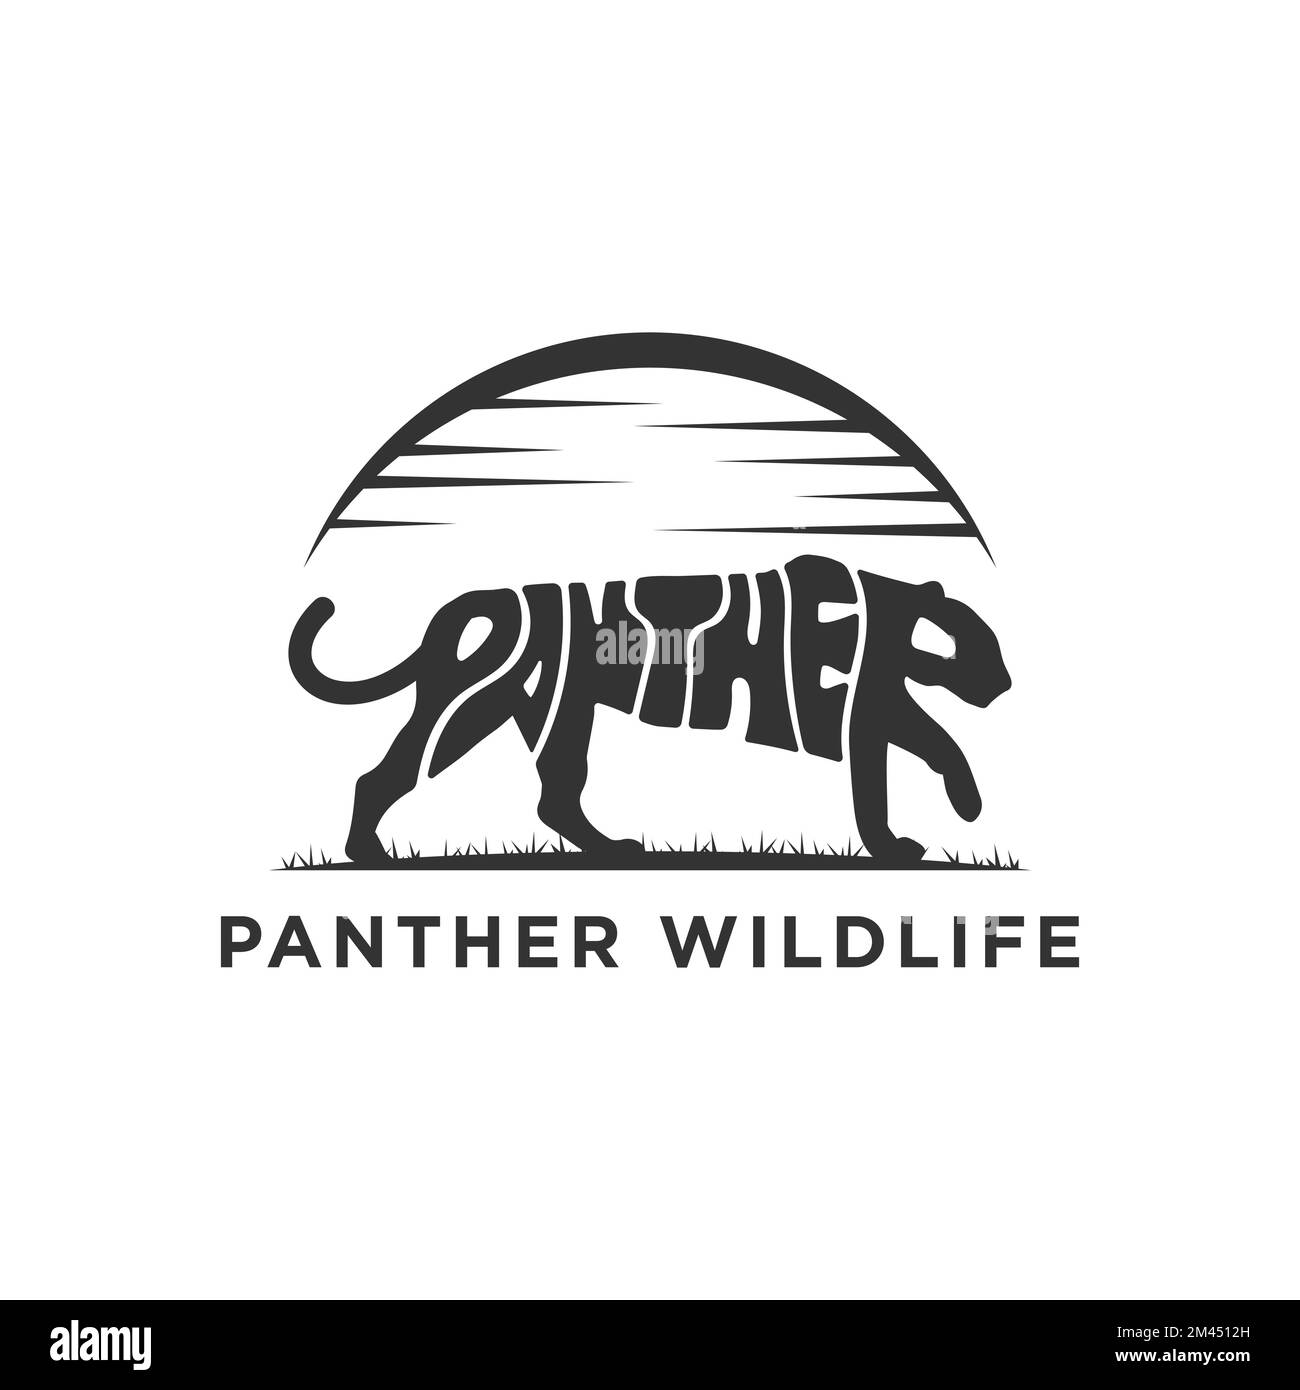 Black Panther Wildlife animal logo design vector, icon with Warp Text Into the Shape of a Panther animal illustration Stock Vector